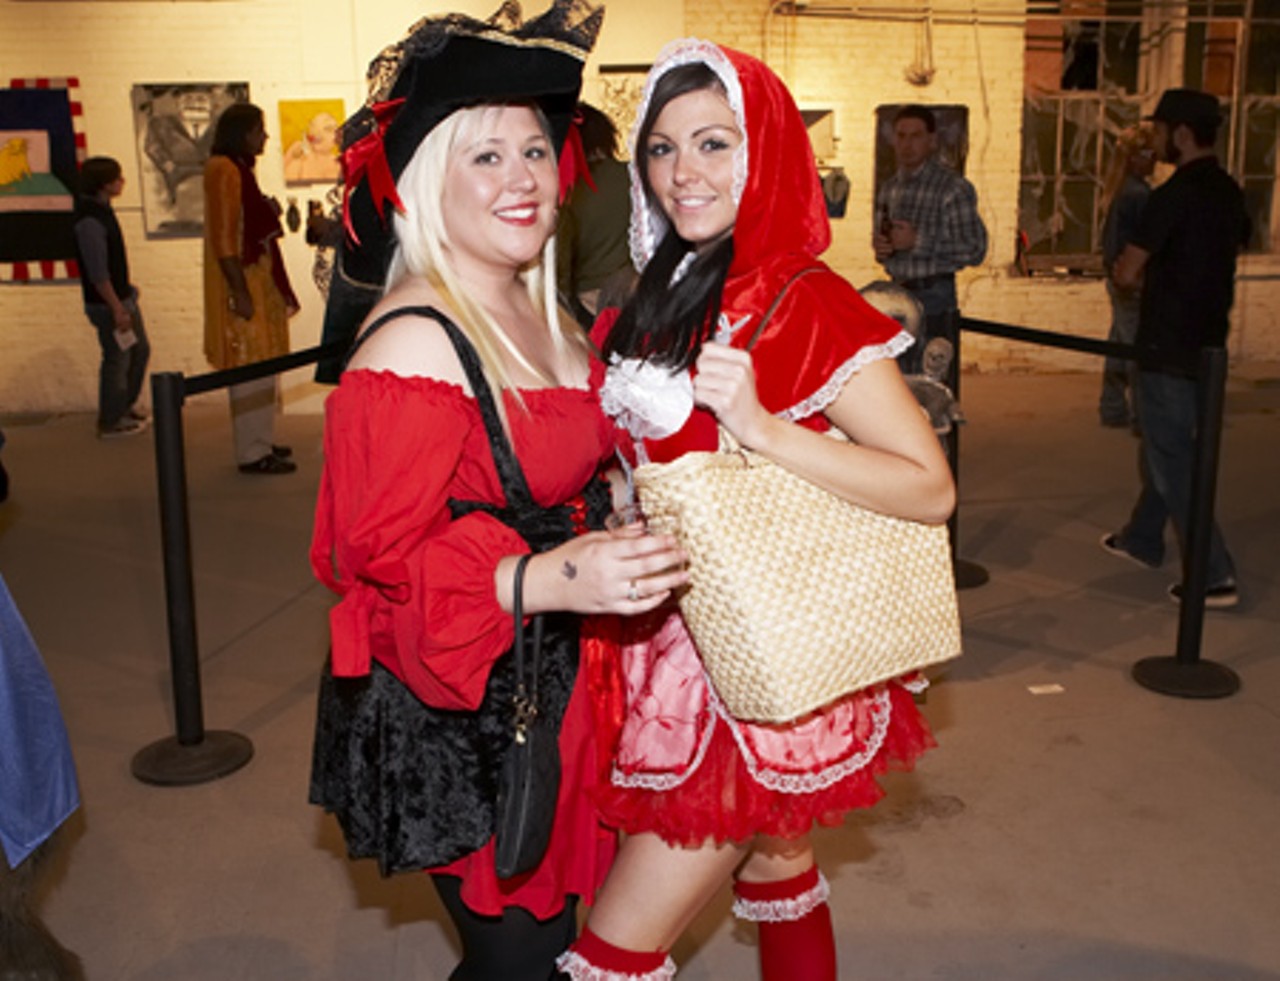 Red Riding Hood and her girlfriend.